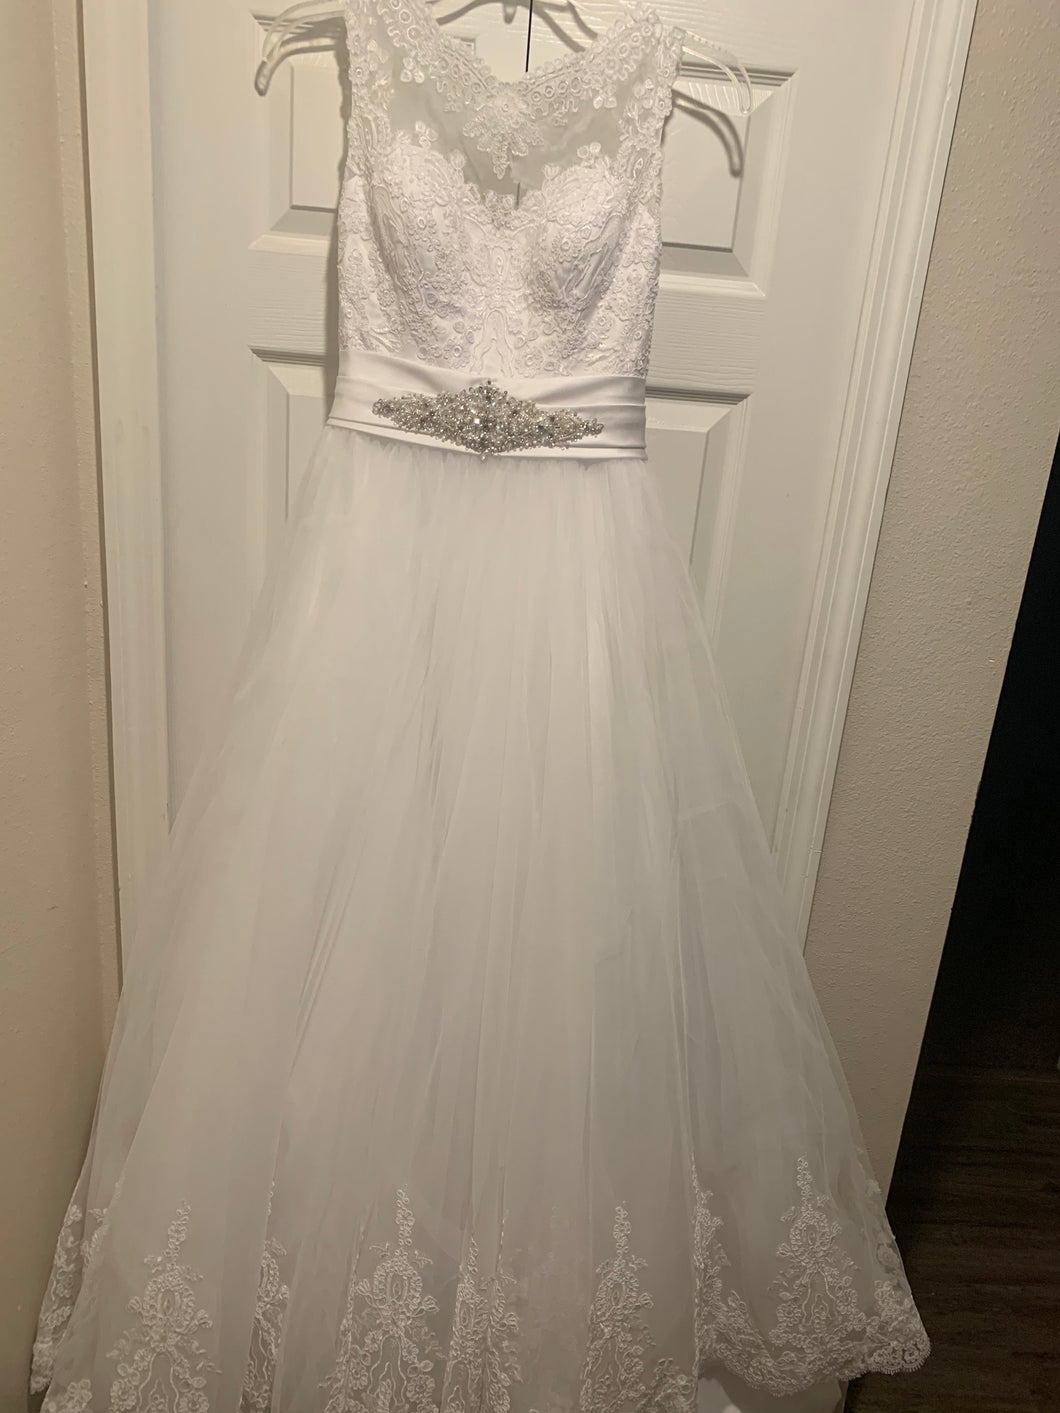 Symphony of Venus 'Ball gown' wedding dress size-08 PREOWNED